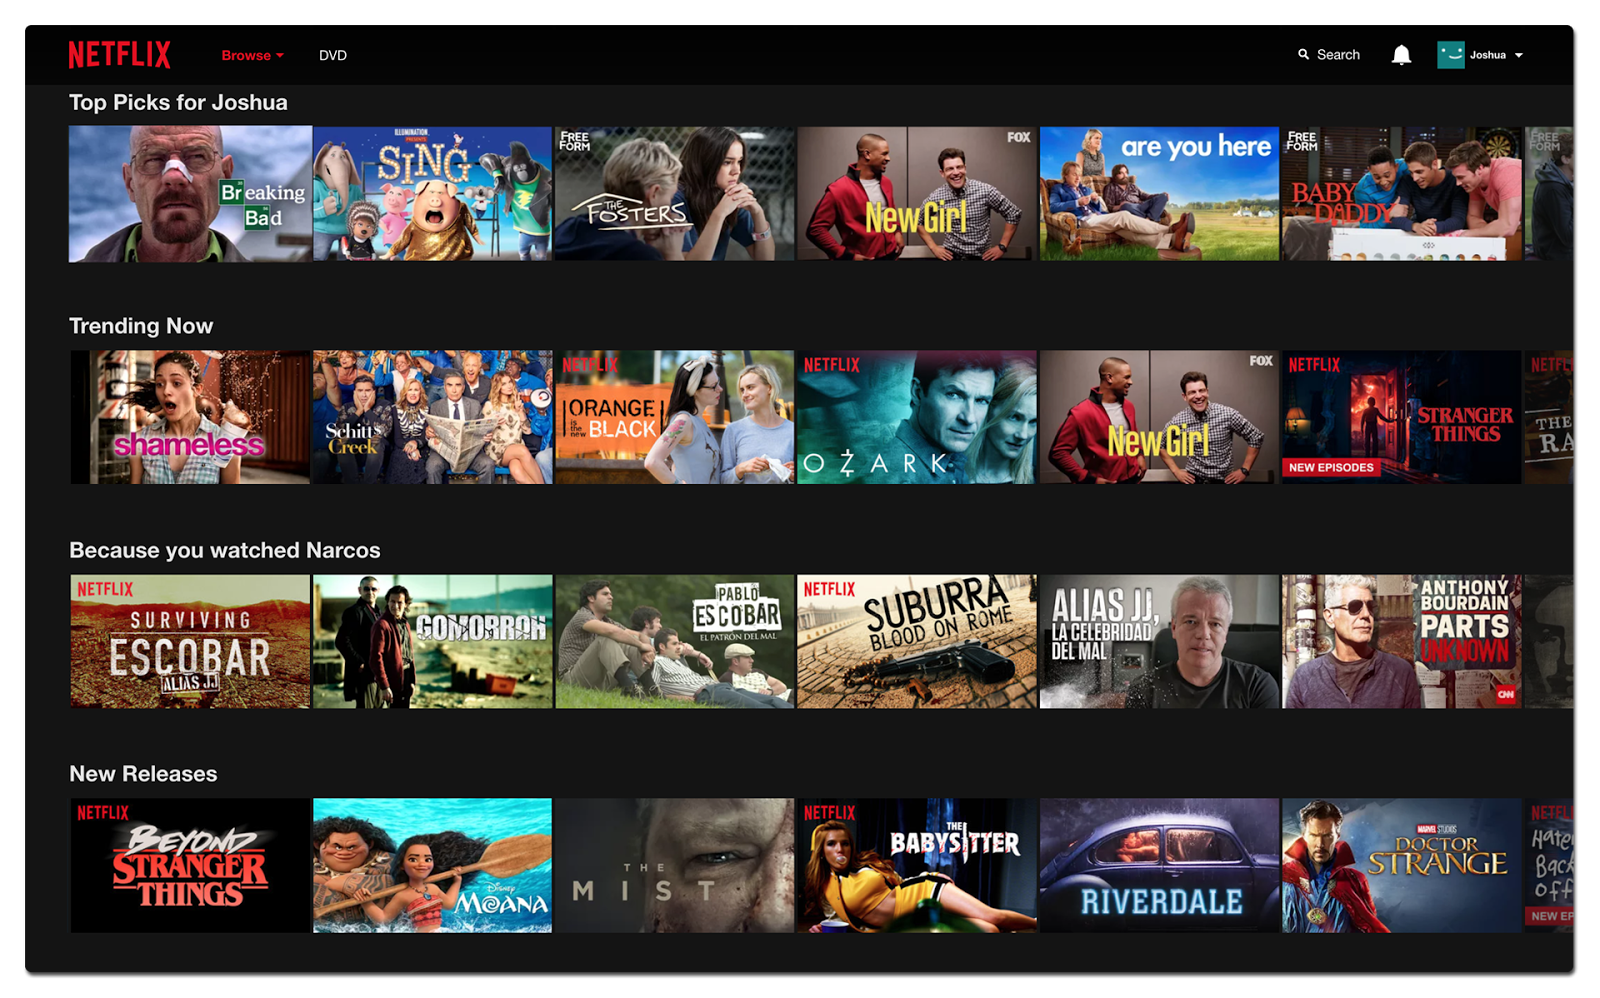  An example of a personalized Netflix homepag